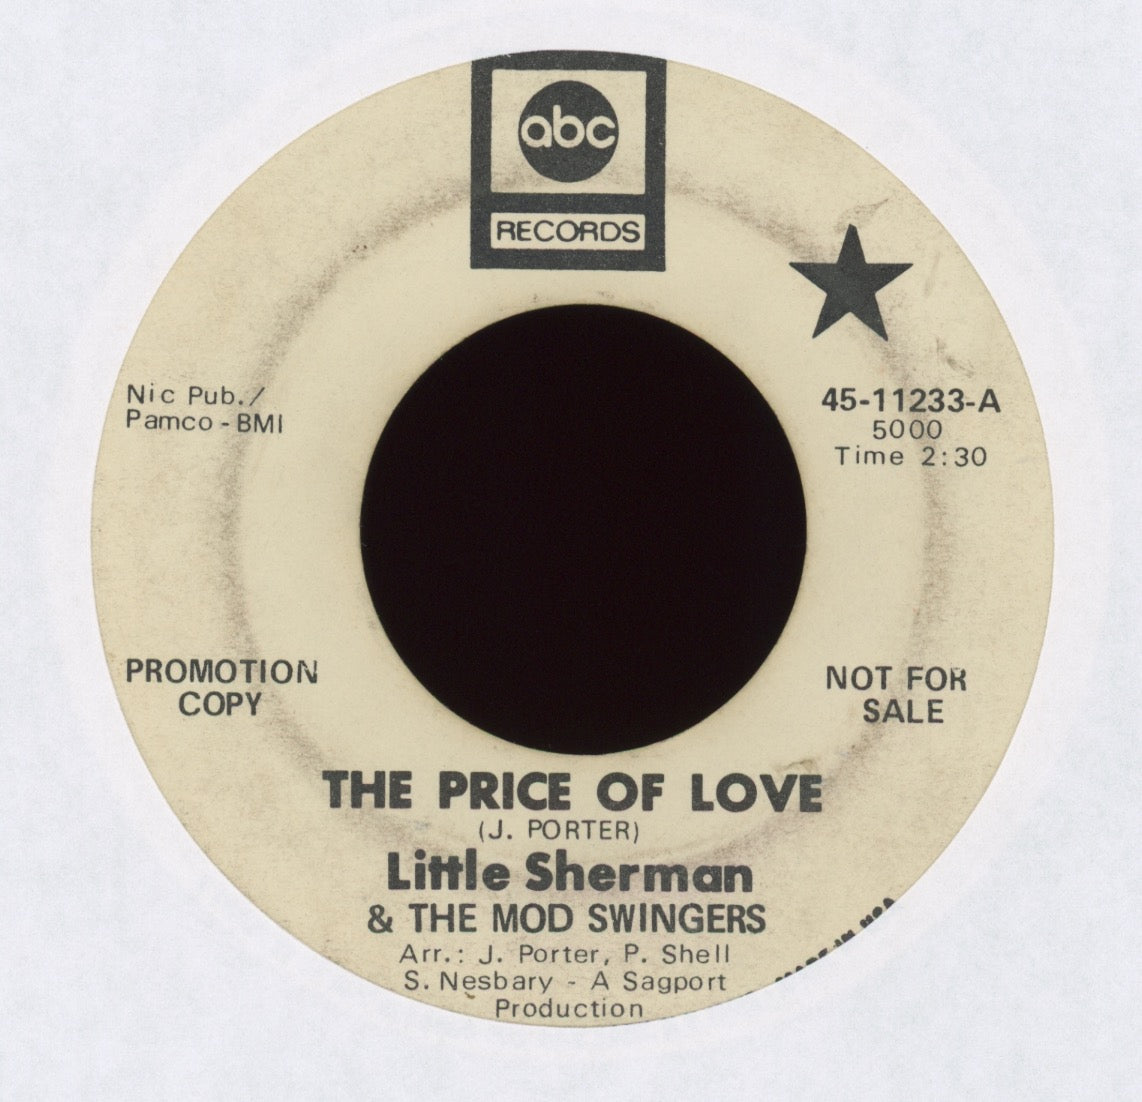 Little Sherman & The Mod Swingers - The Price Of Love on ABC Promo